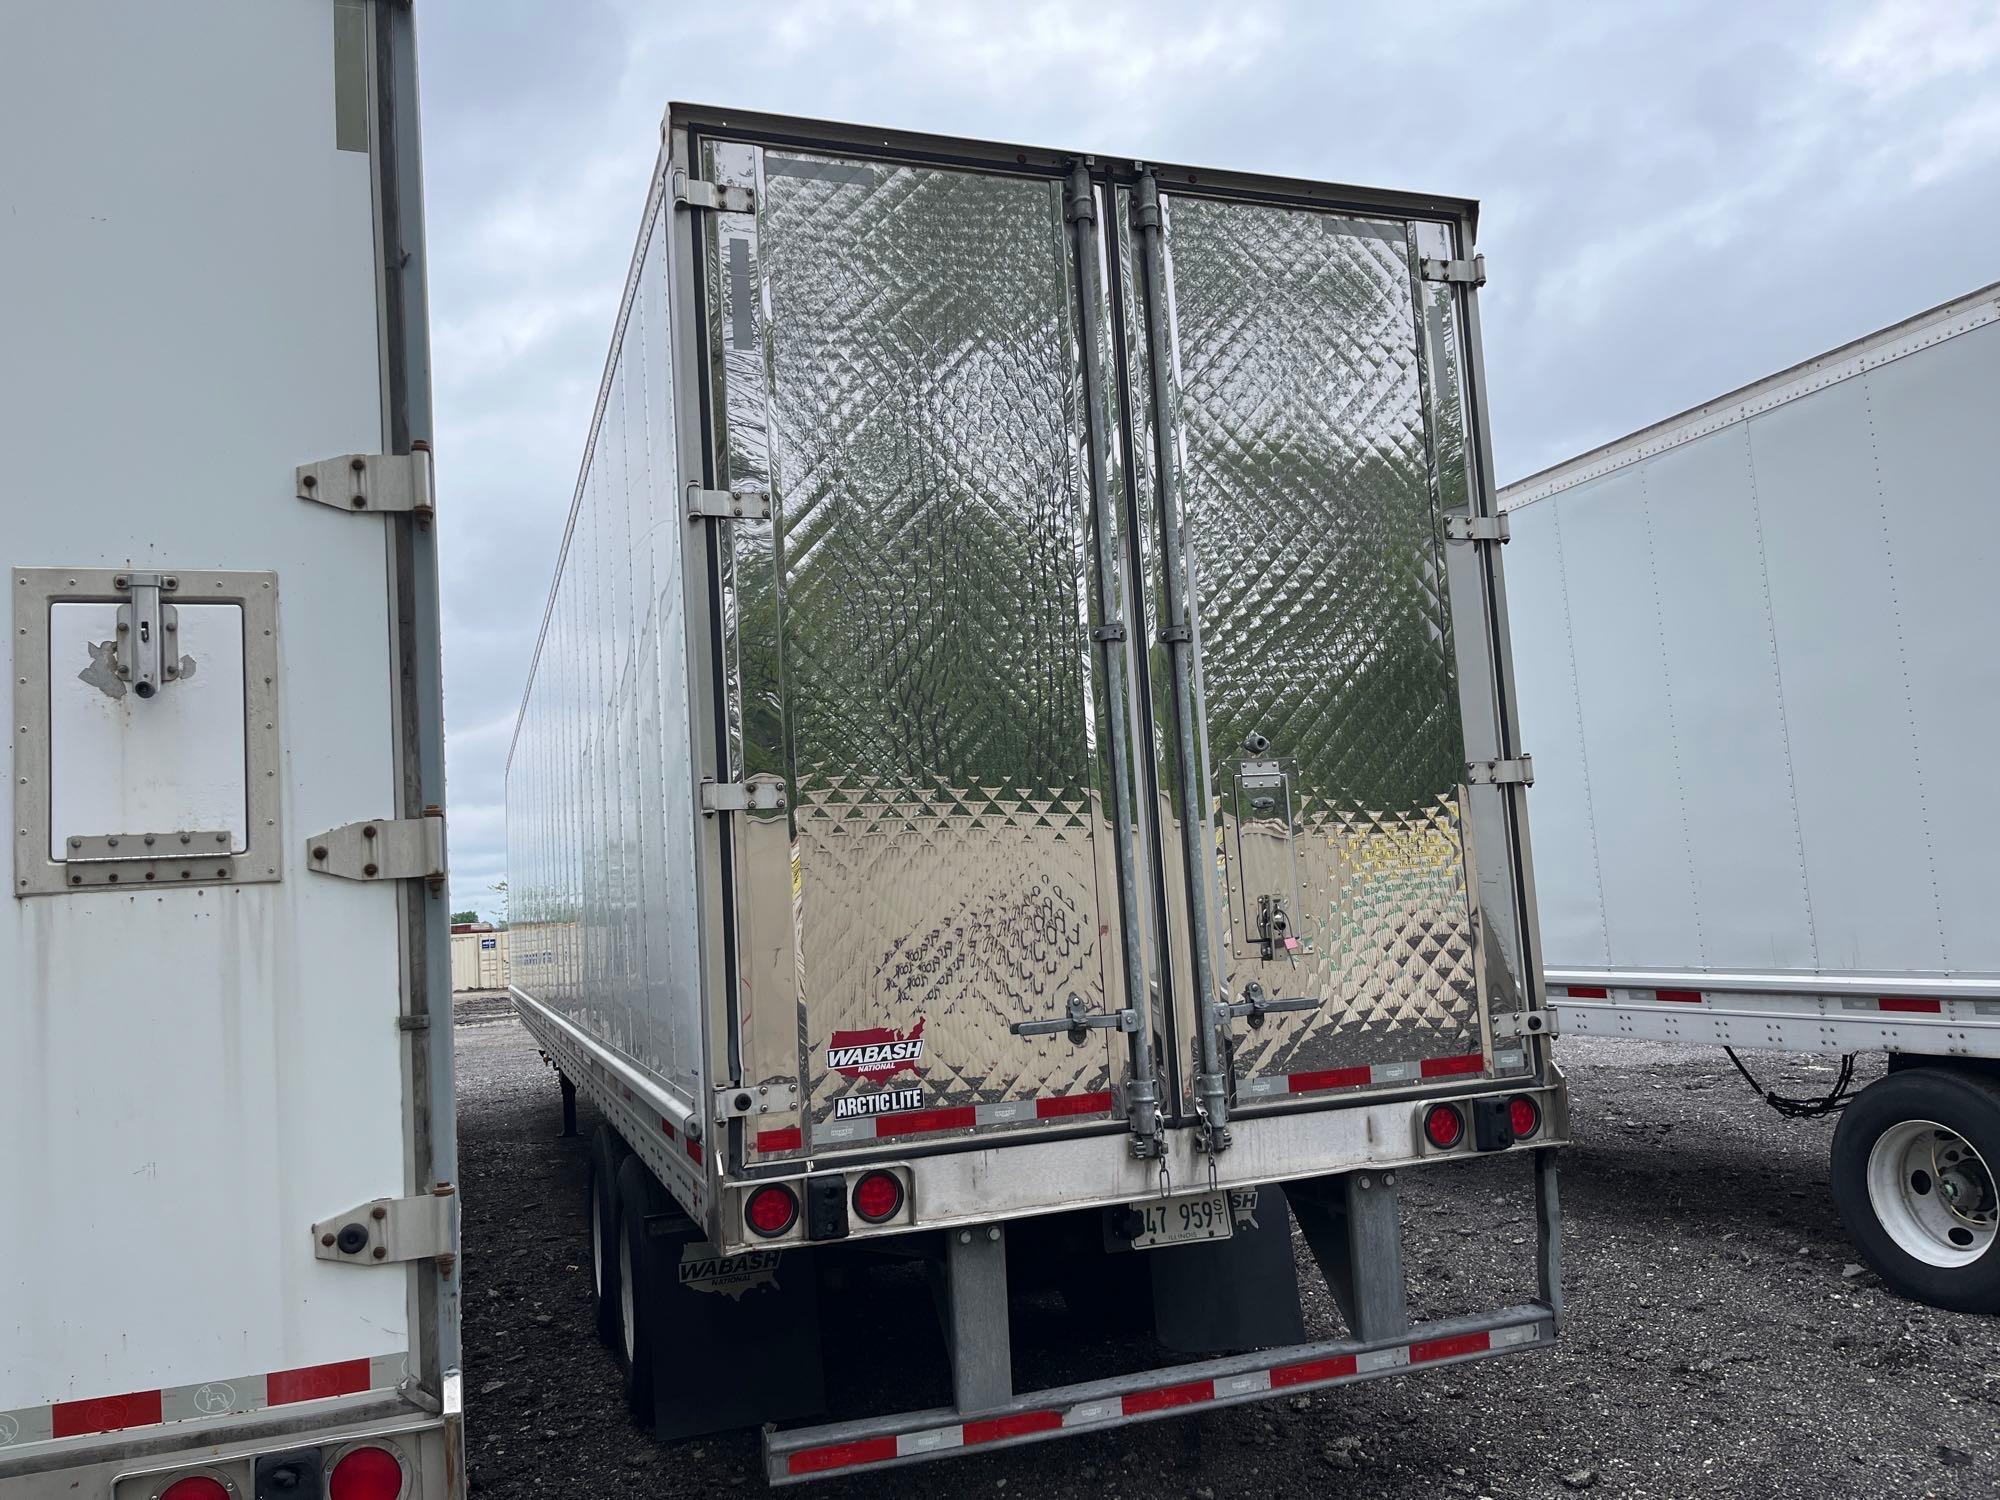 2022 WABASH REEFER TRAILER VN:1JJV532B2NL307643 equipped with 53ft. Reefer body, Thermo King reefer